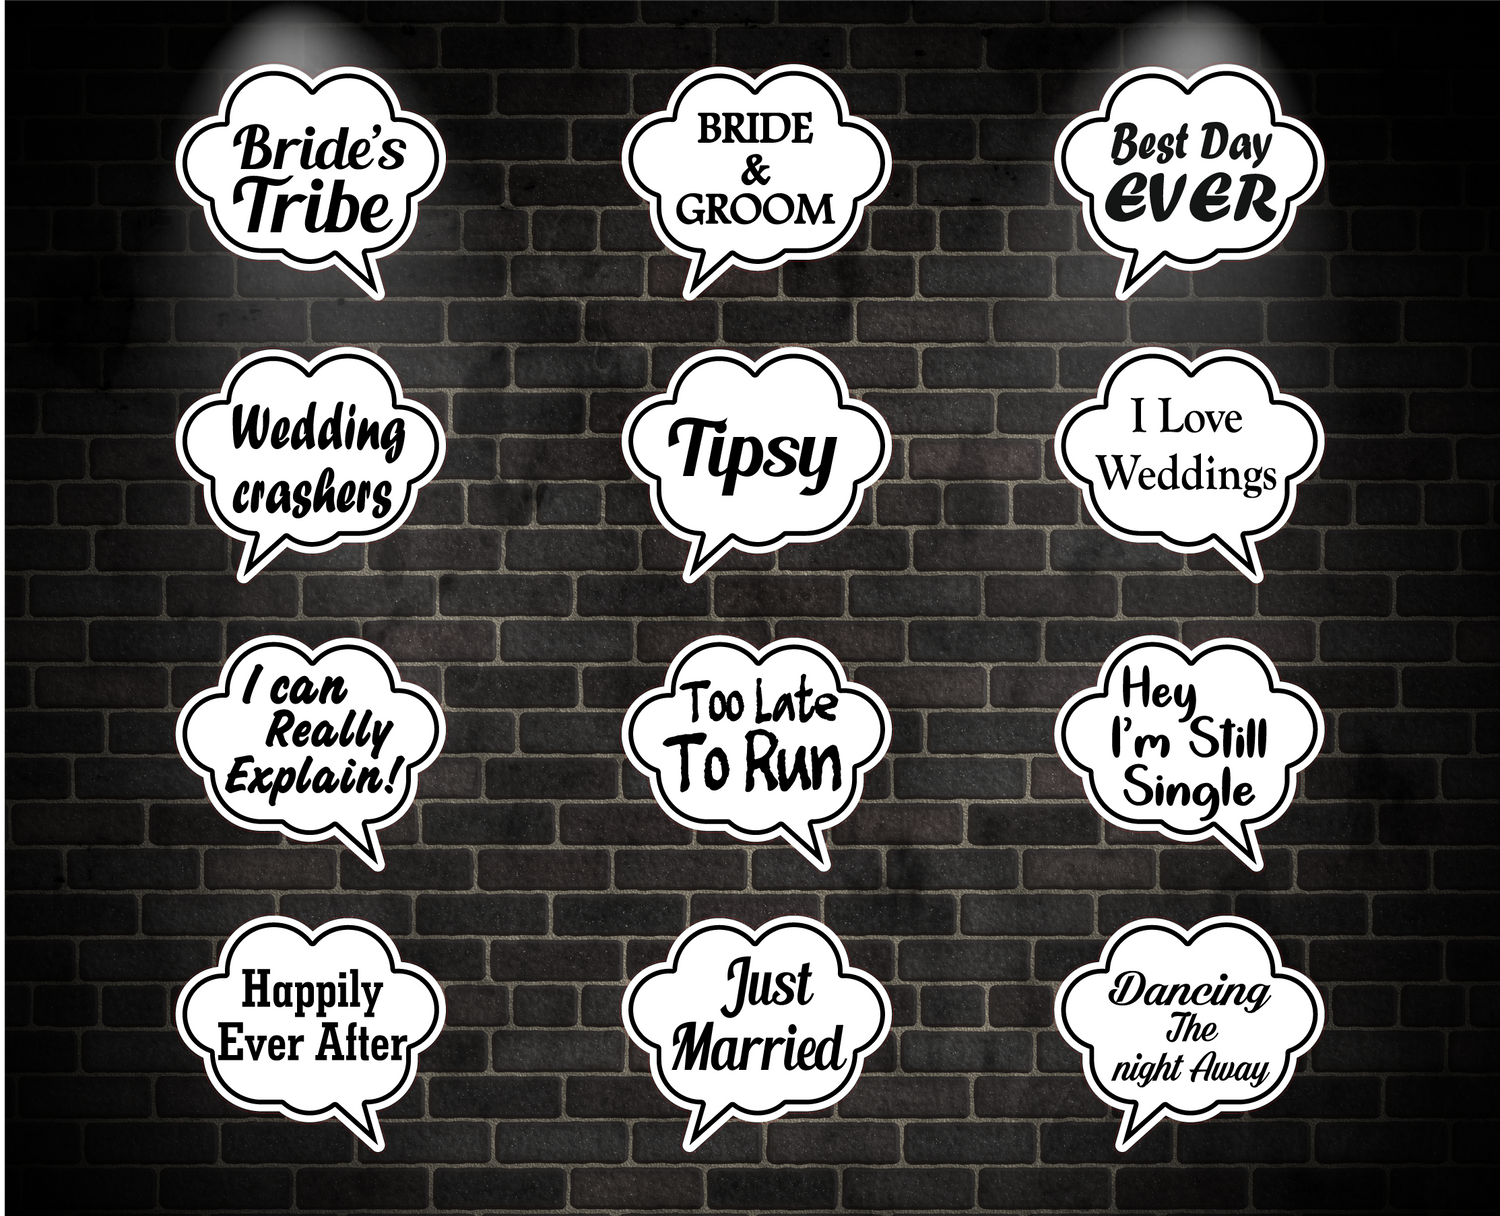 Wedding Oversized Speech Bubble Signs includes Free Shipping